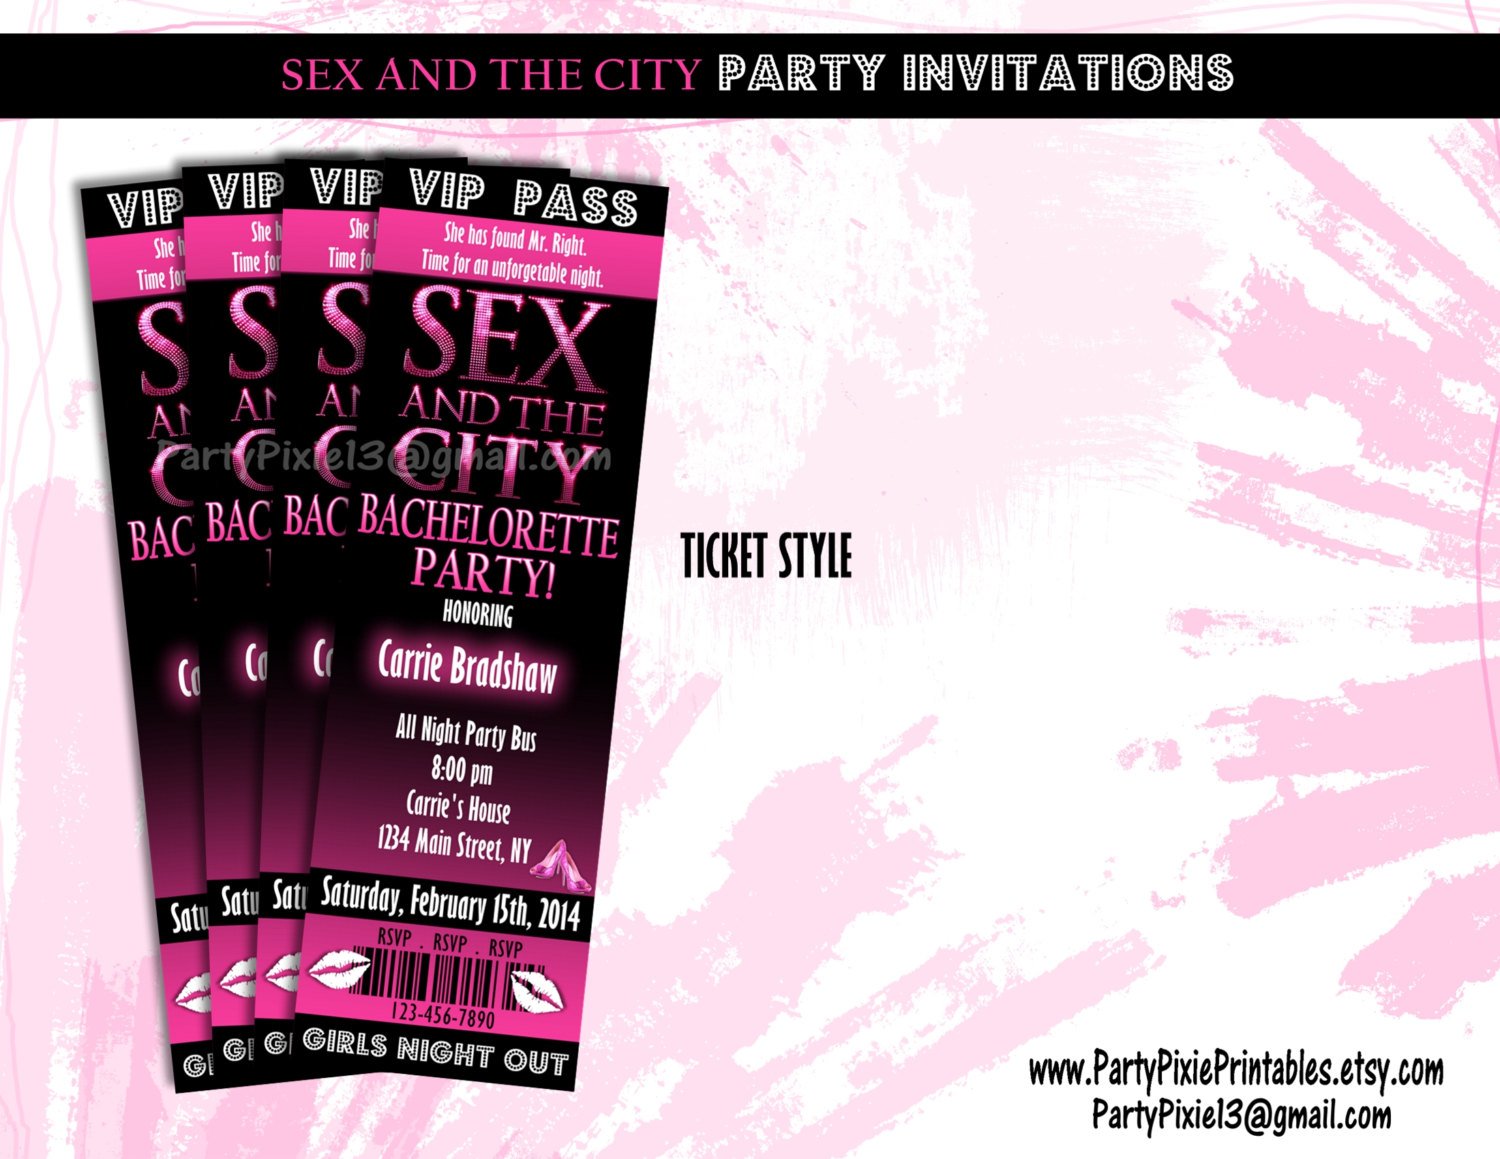 Sex And The City Party Invitations By Partypixieprintables